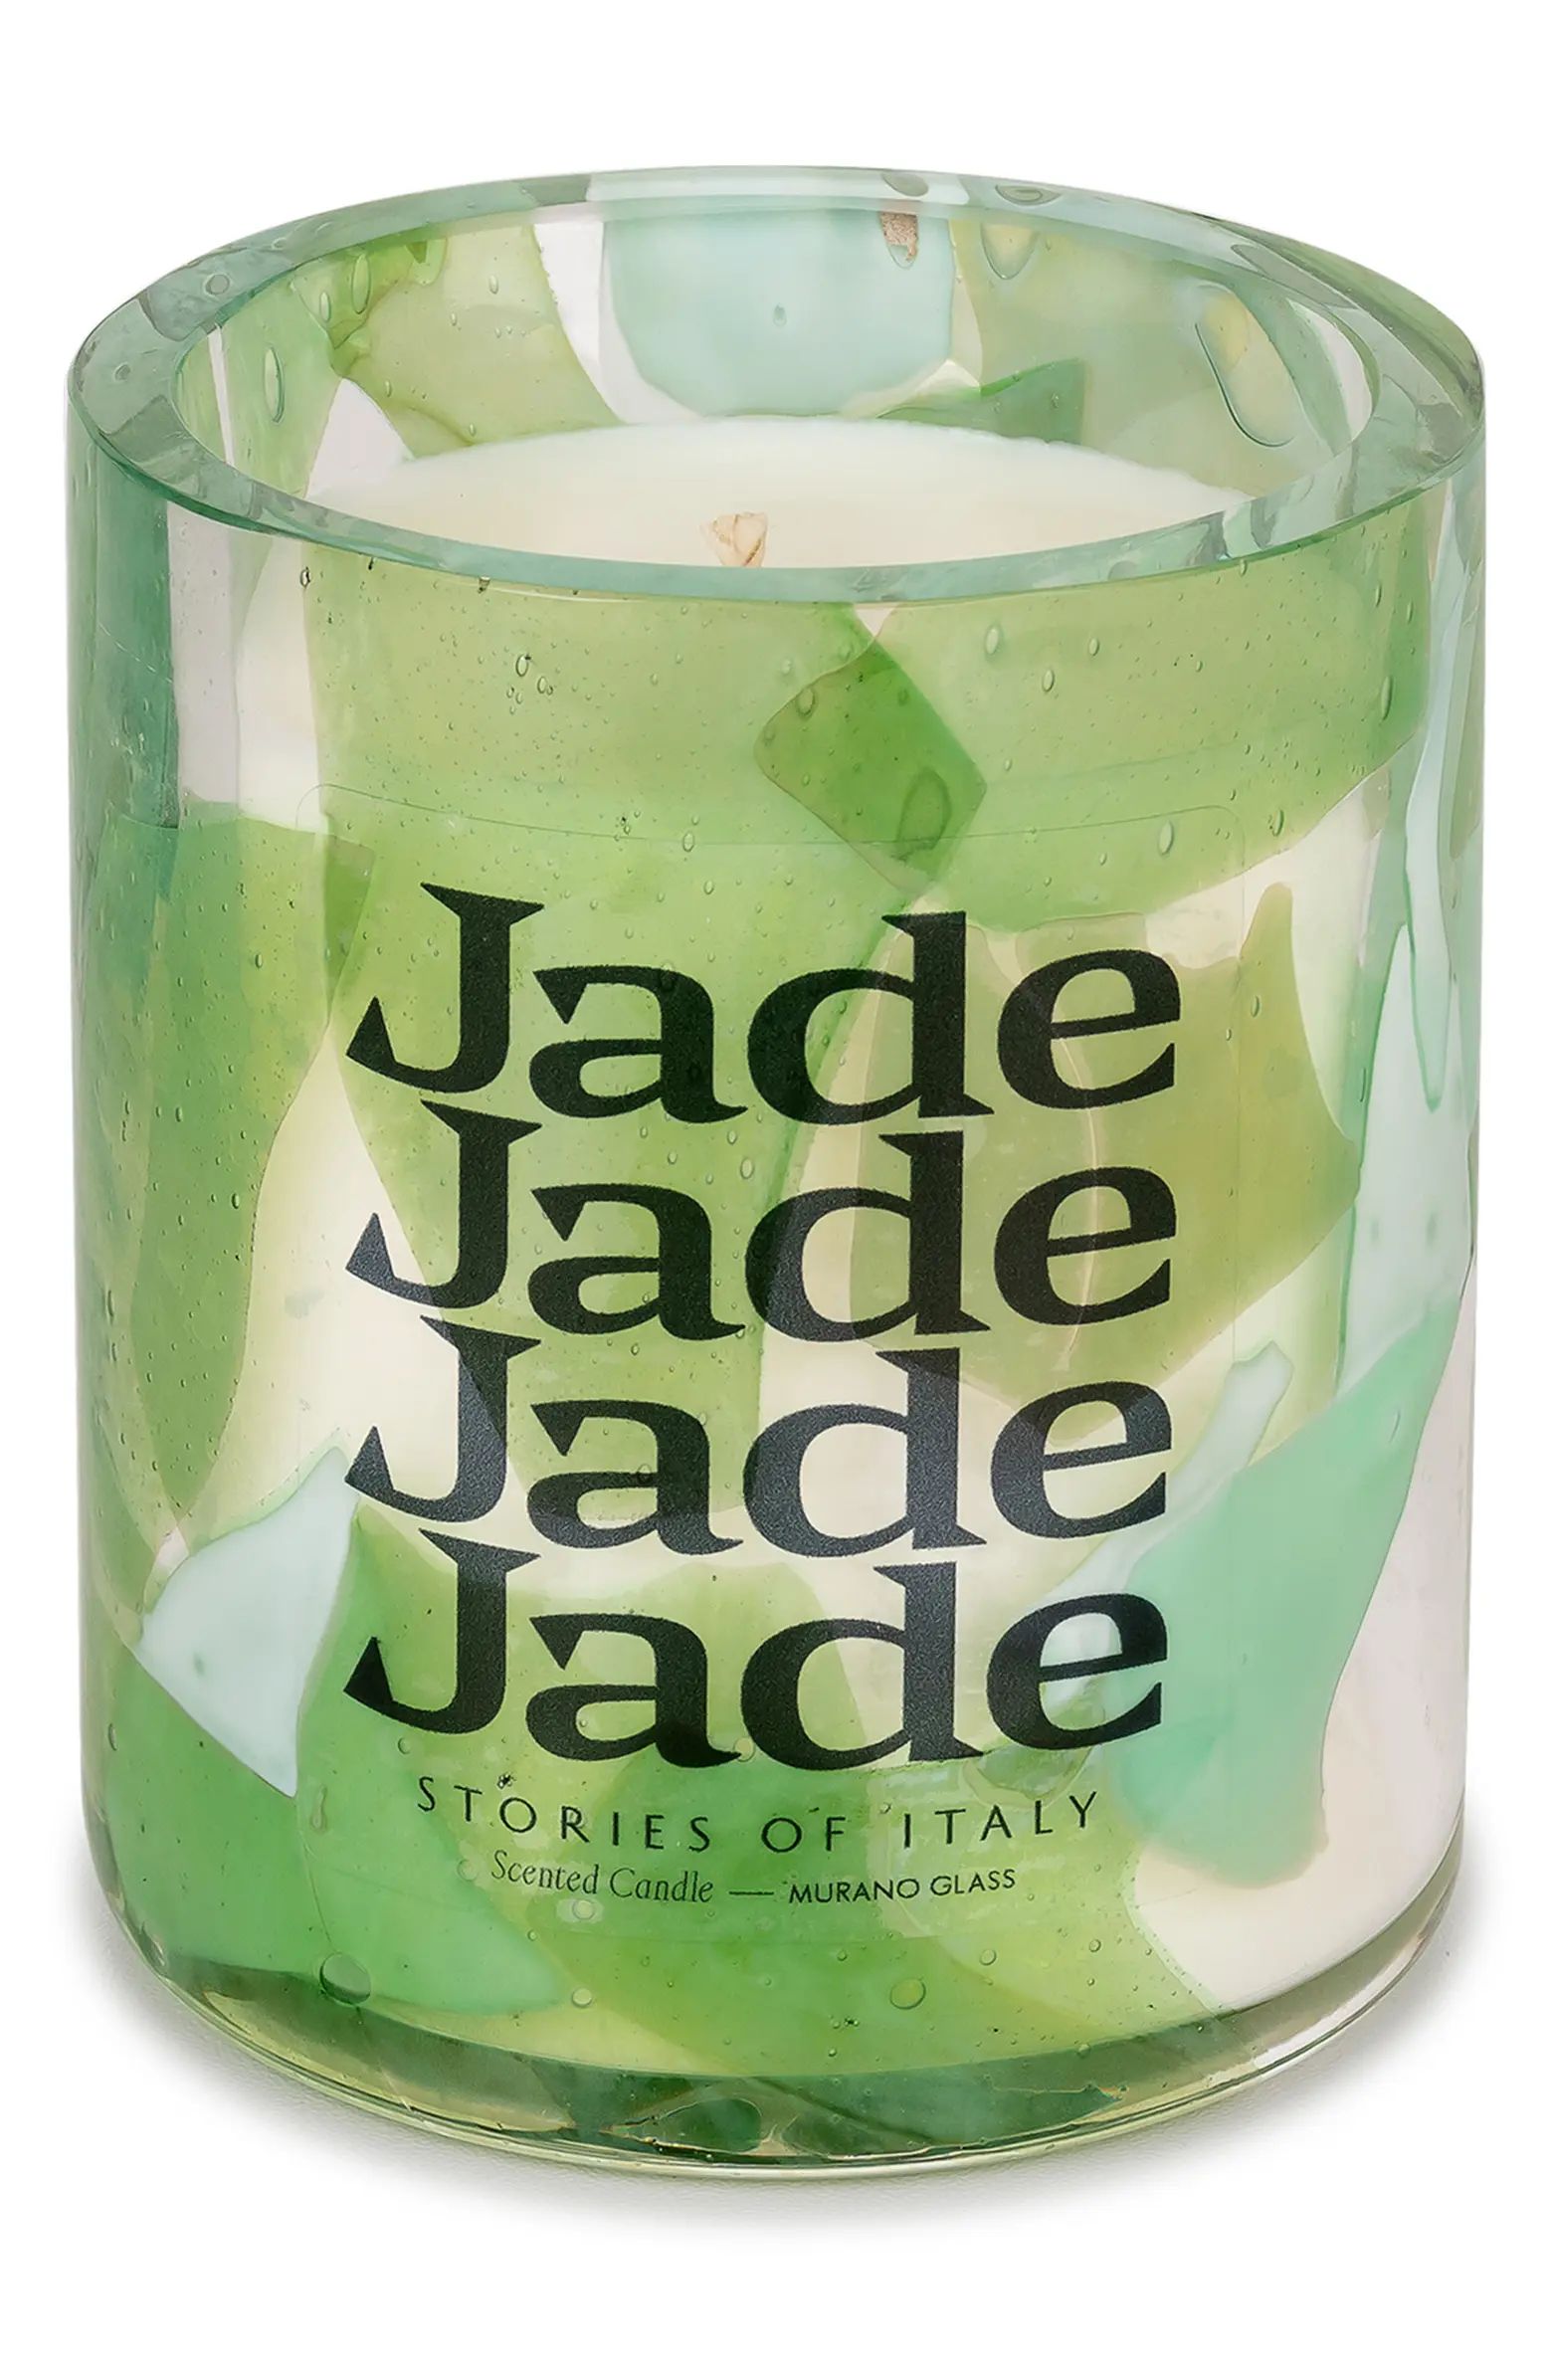 Stories of Italy Jade Scented Candle | Nordstrom | Nordstrom